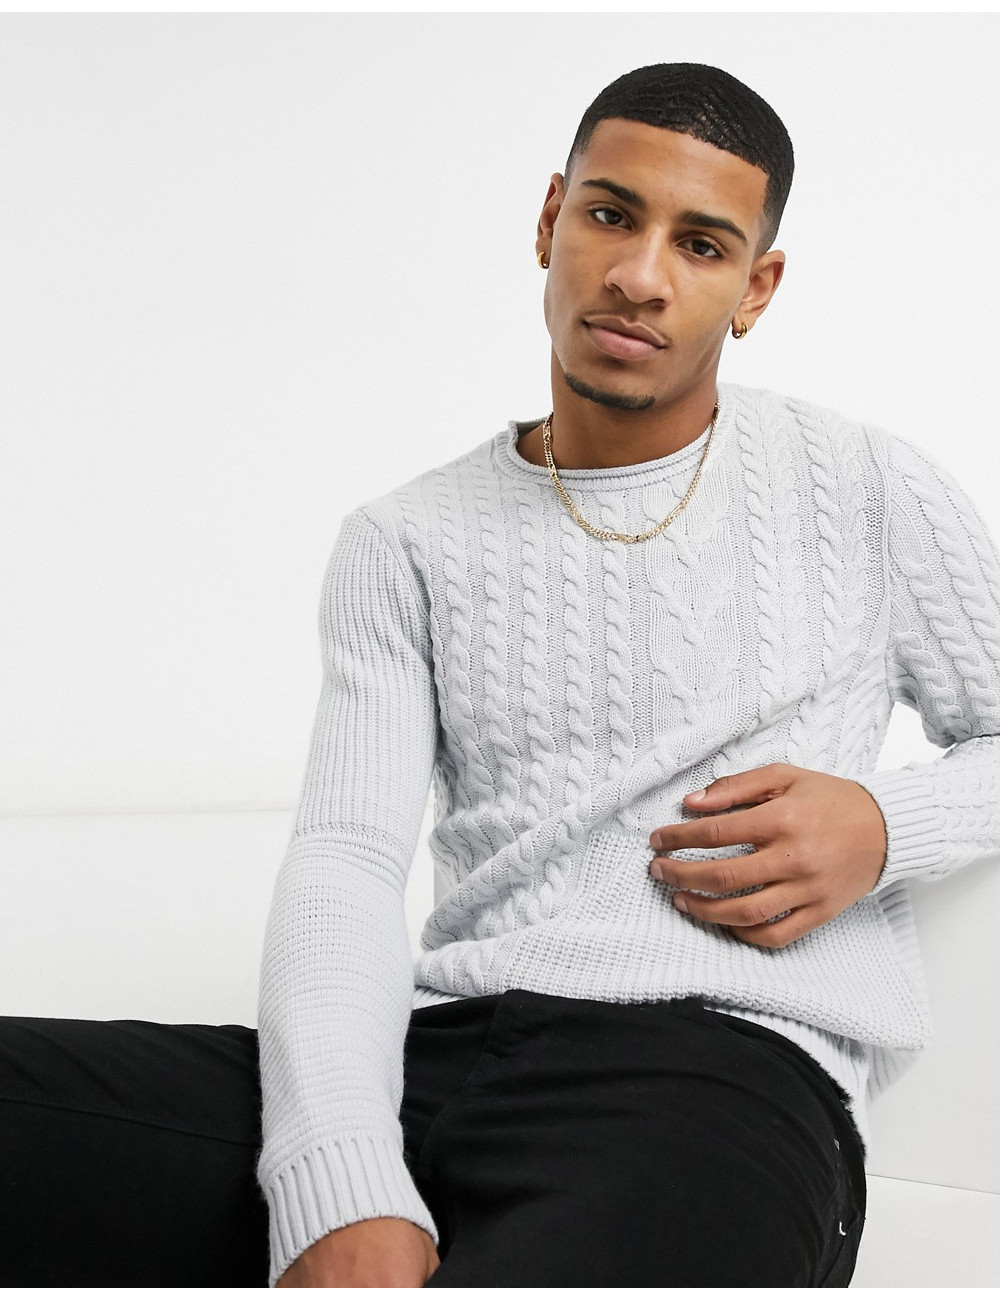 New Look cable knit detail...